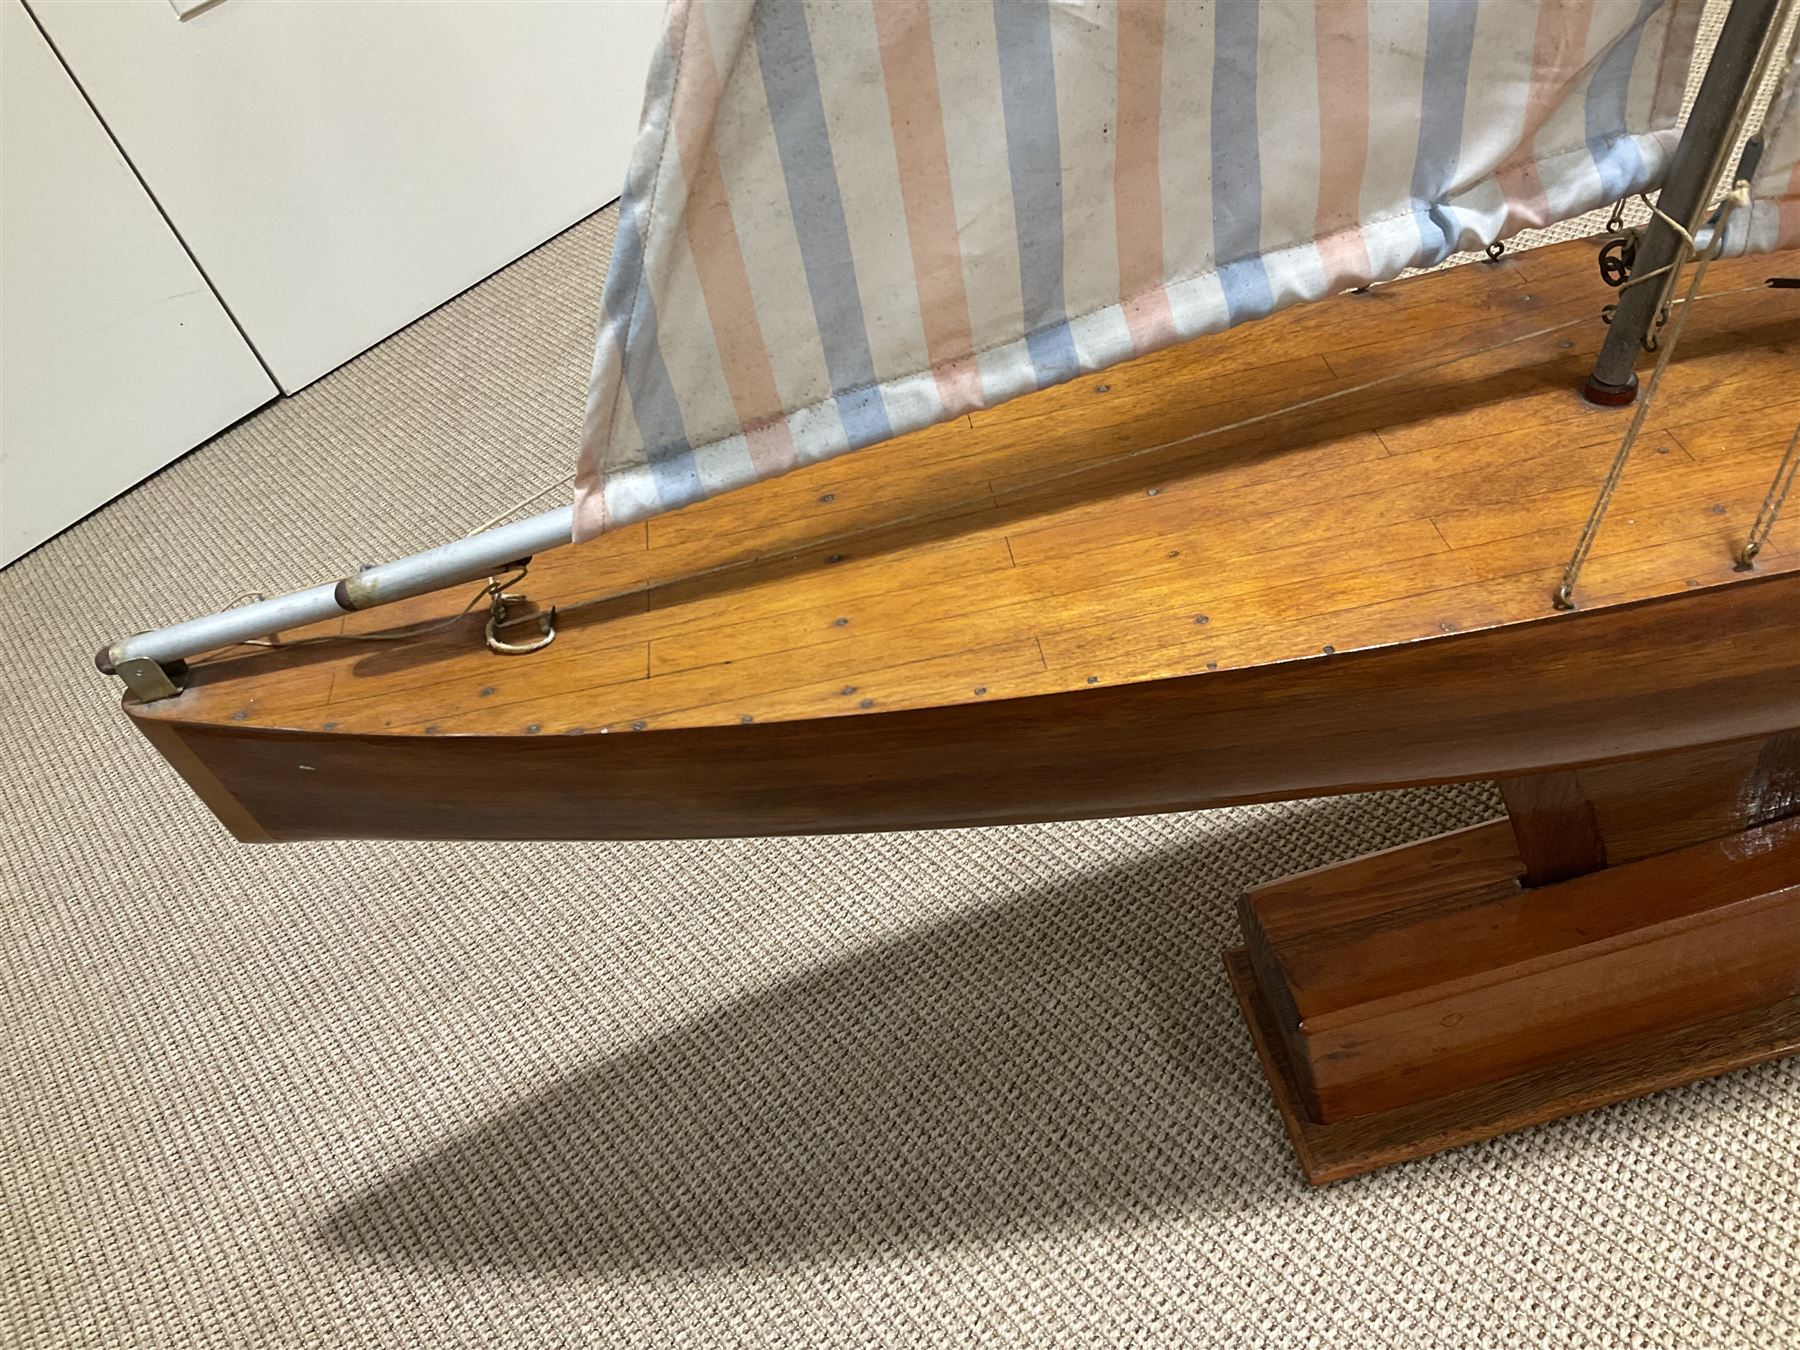 Large pond yacht with simulated planked mahogany deck - Image 5 of 12